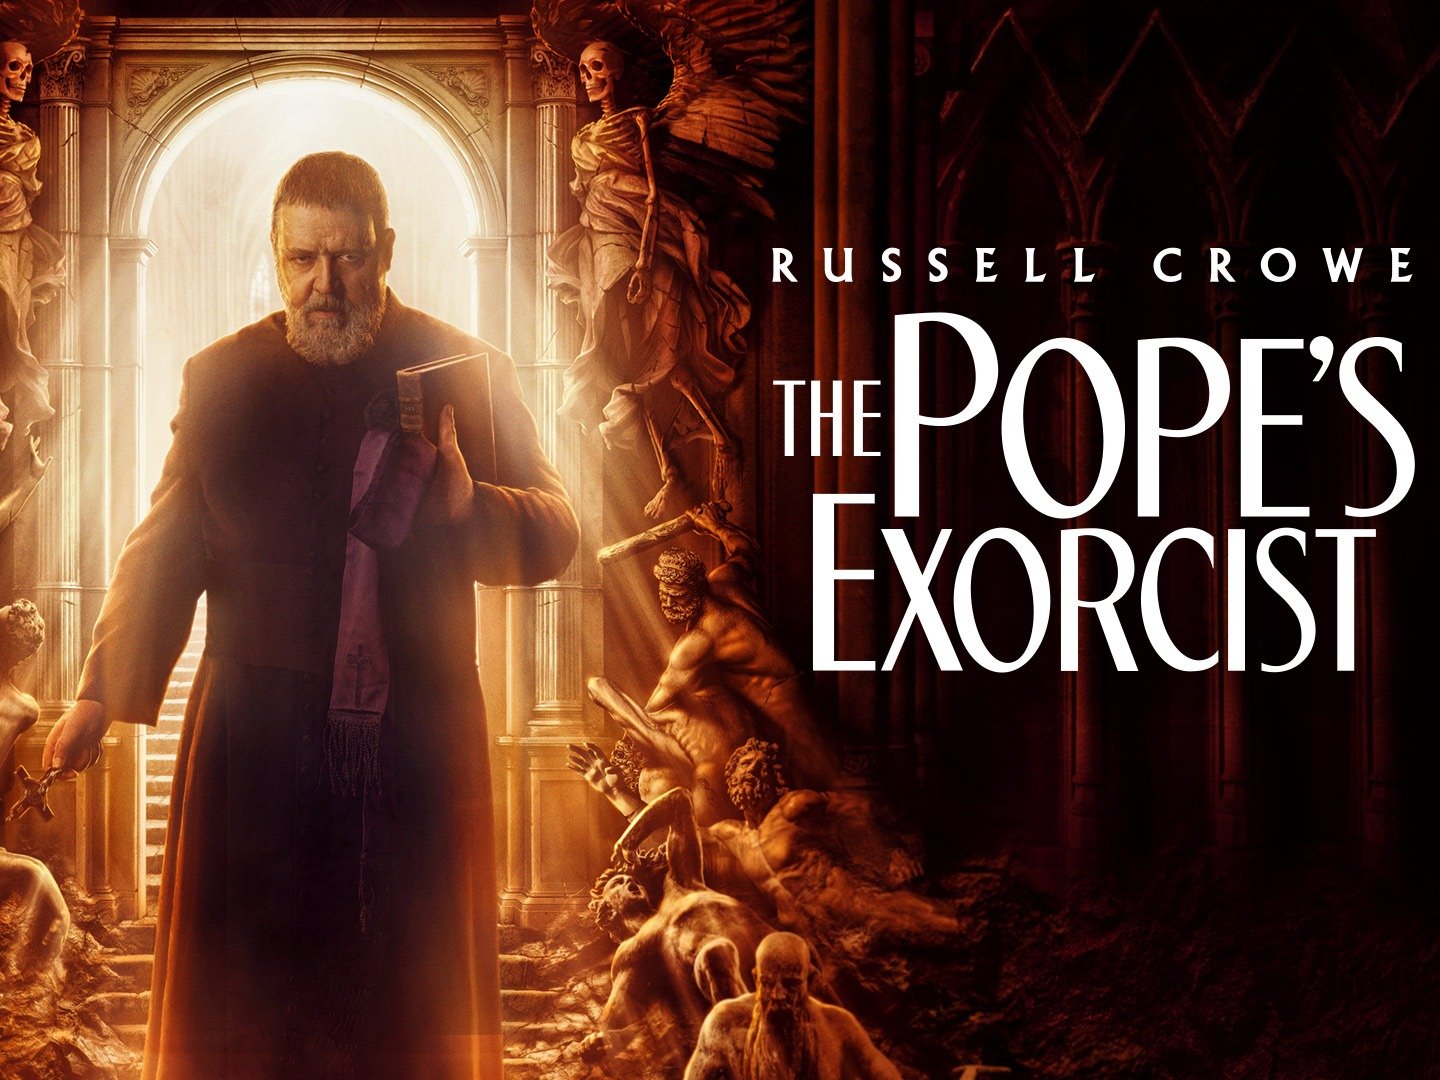 the pope's exorcist movie reviews